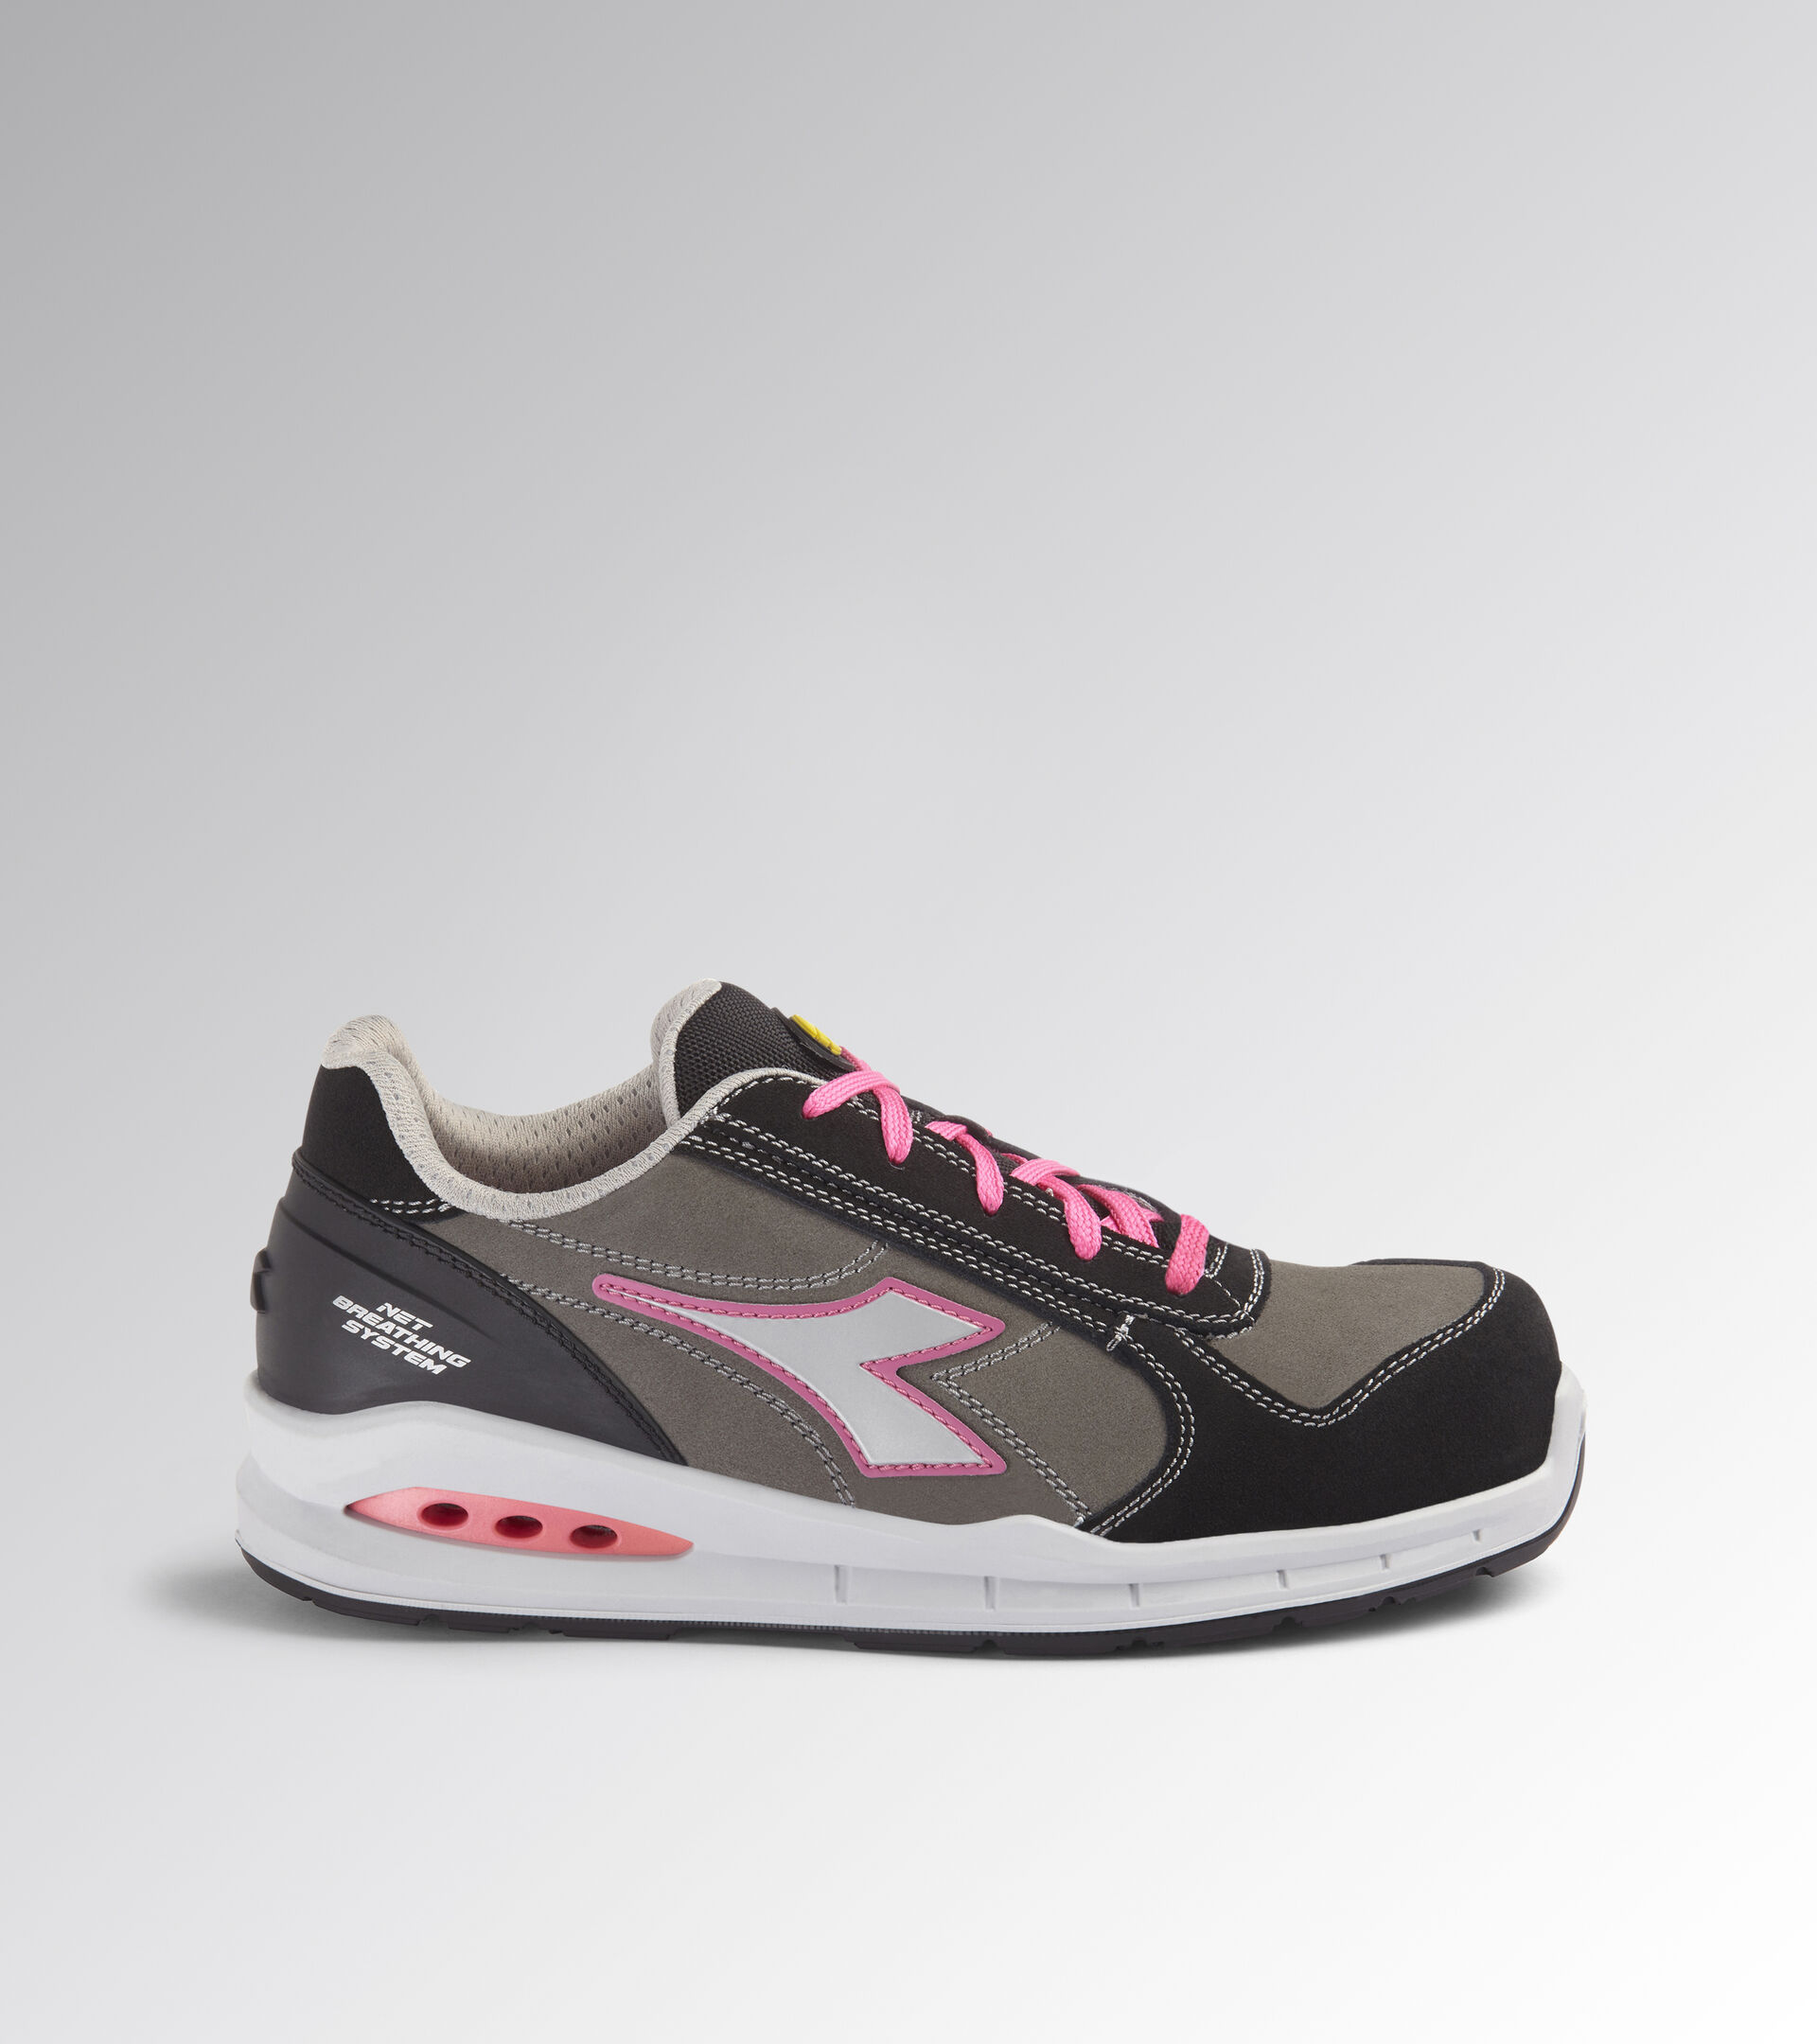 Chaussure de securité basses RUN NET AIRBOX LOW S3 SRC SMOKED PEARL/SILVER/SHOCKING PINK - Utility